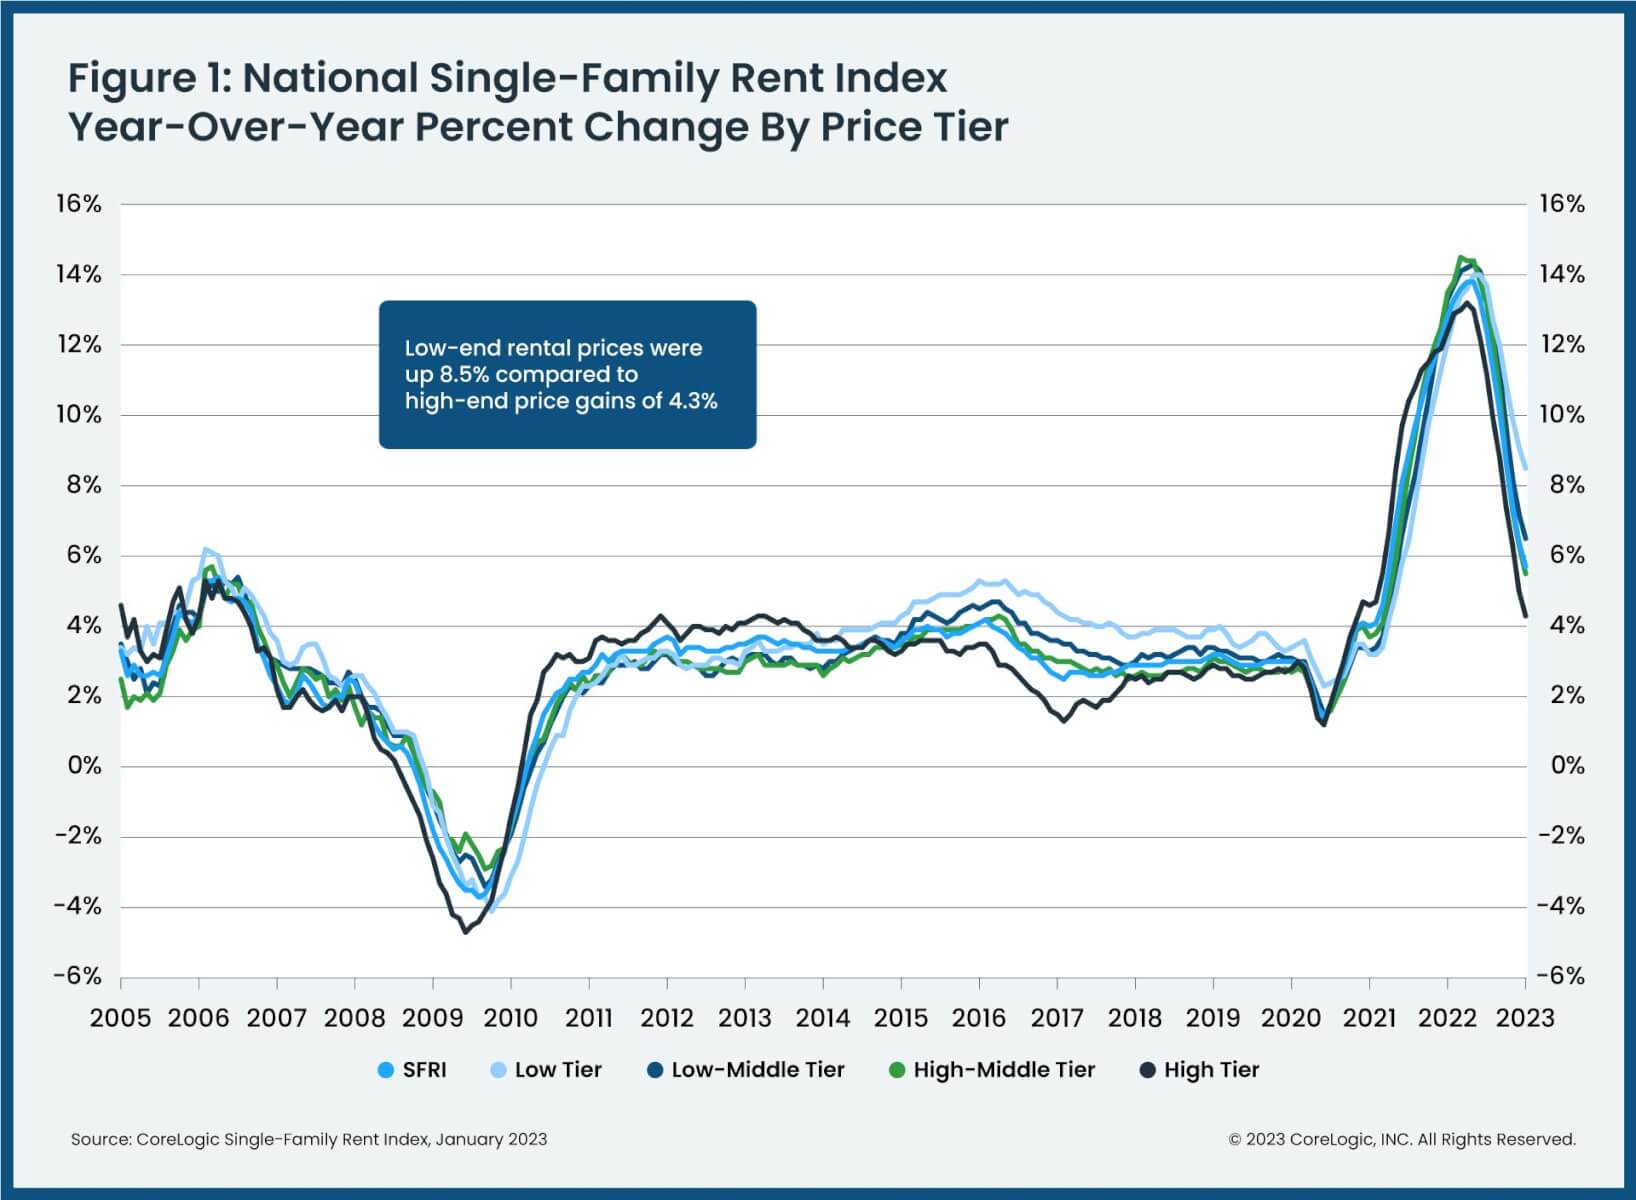 Year-over-year U.S. home price changes by price tier